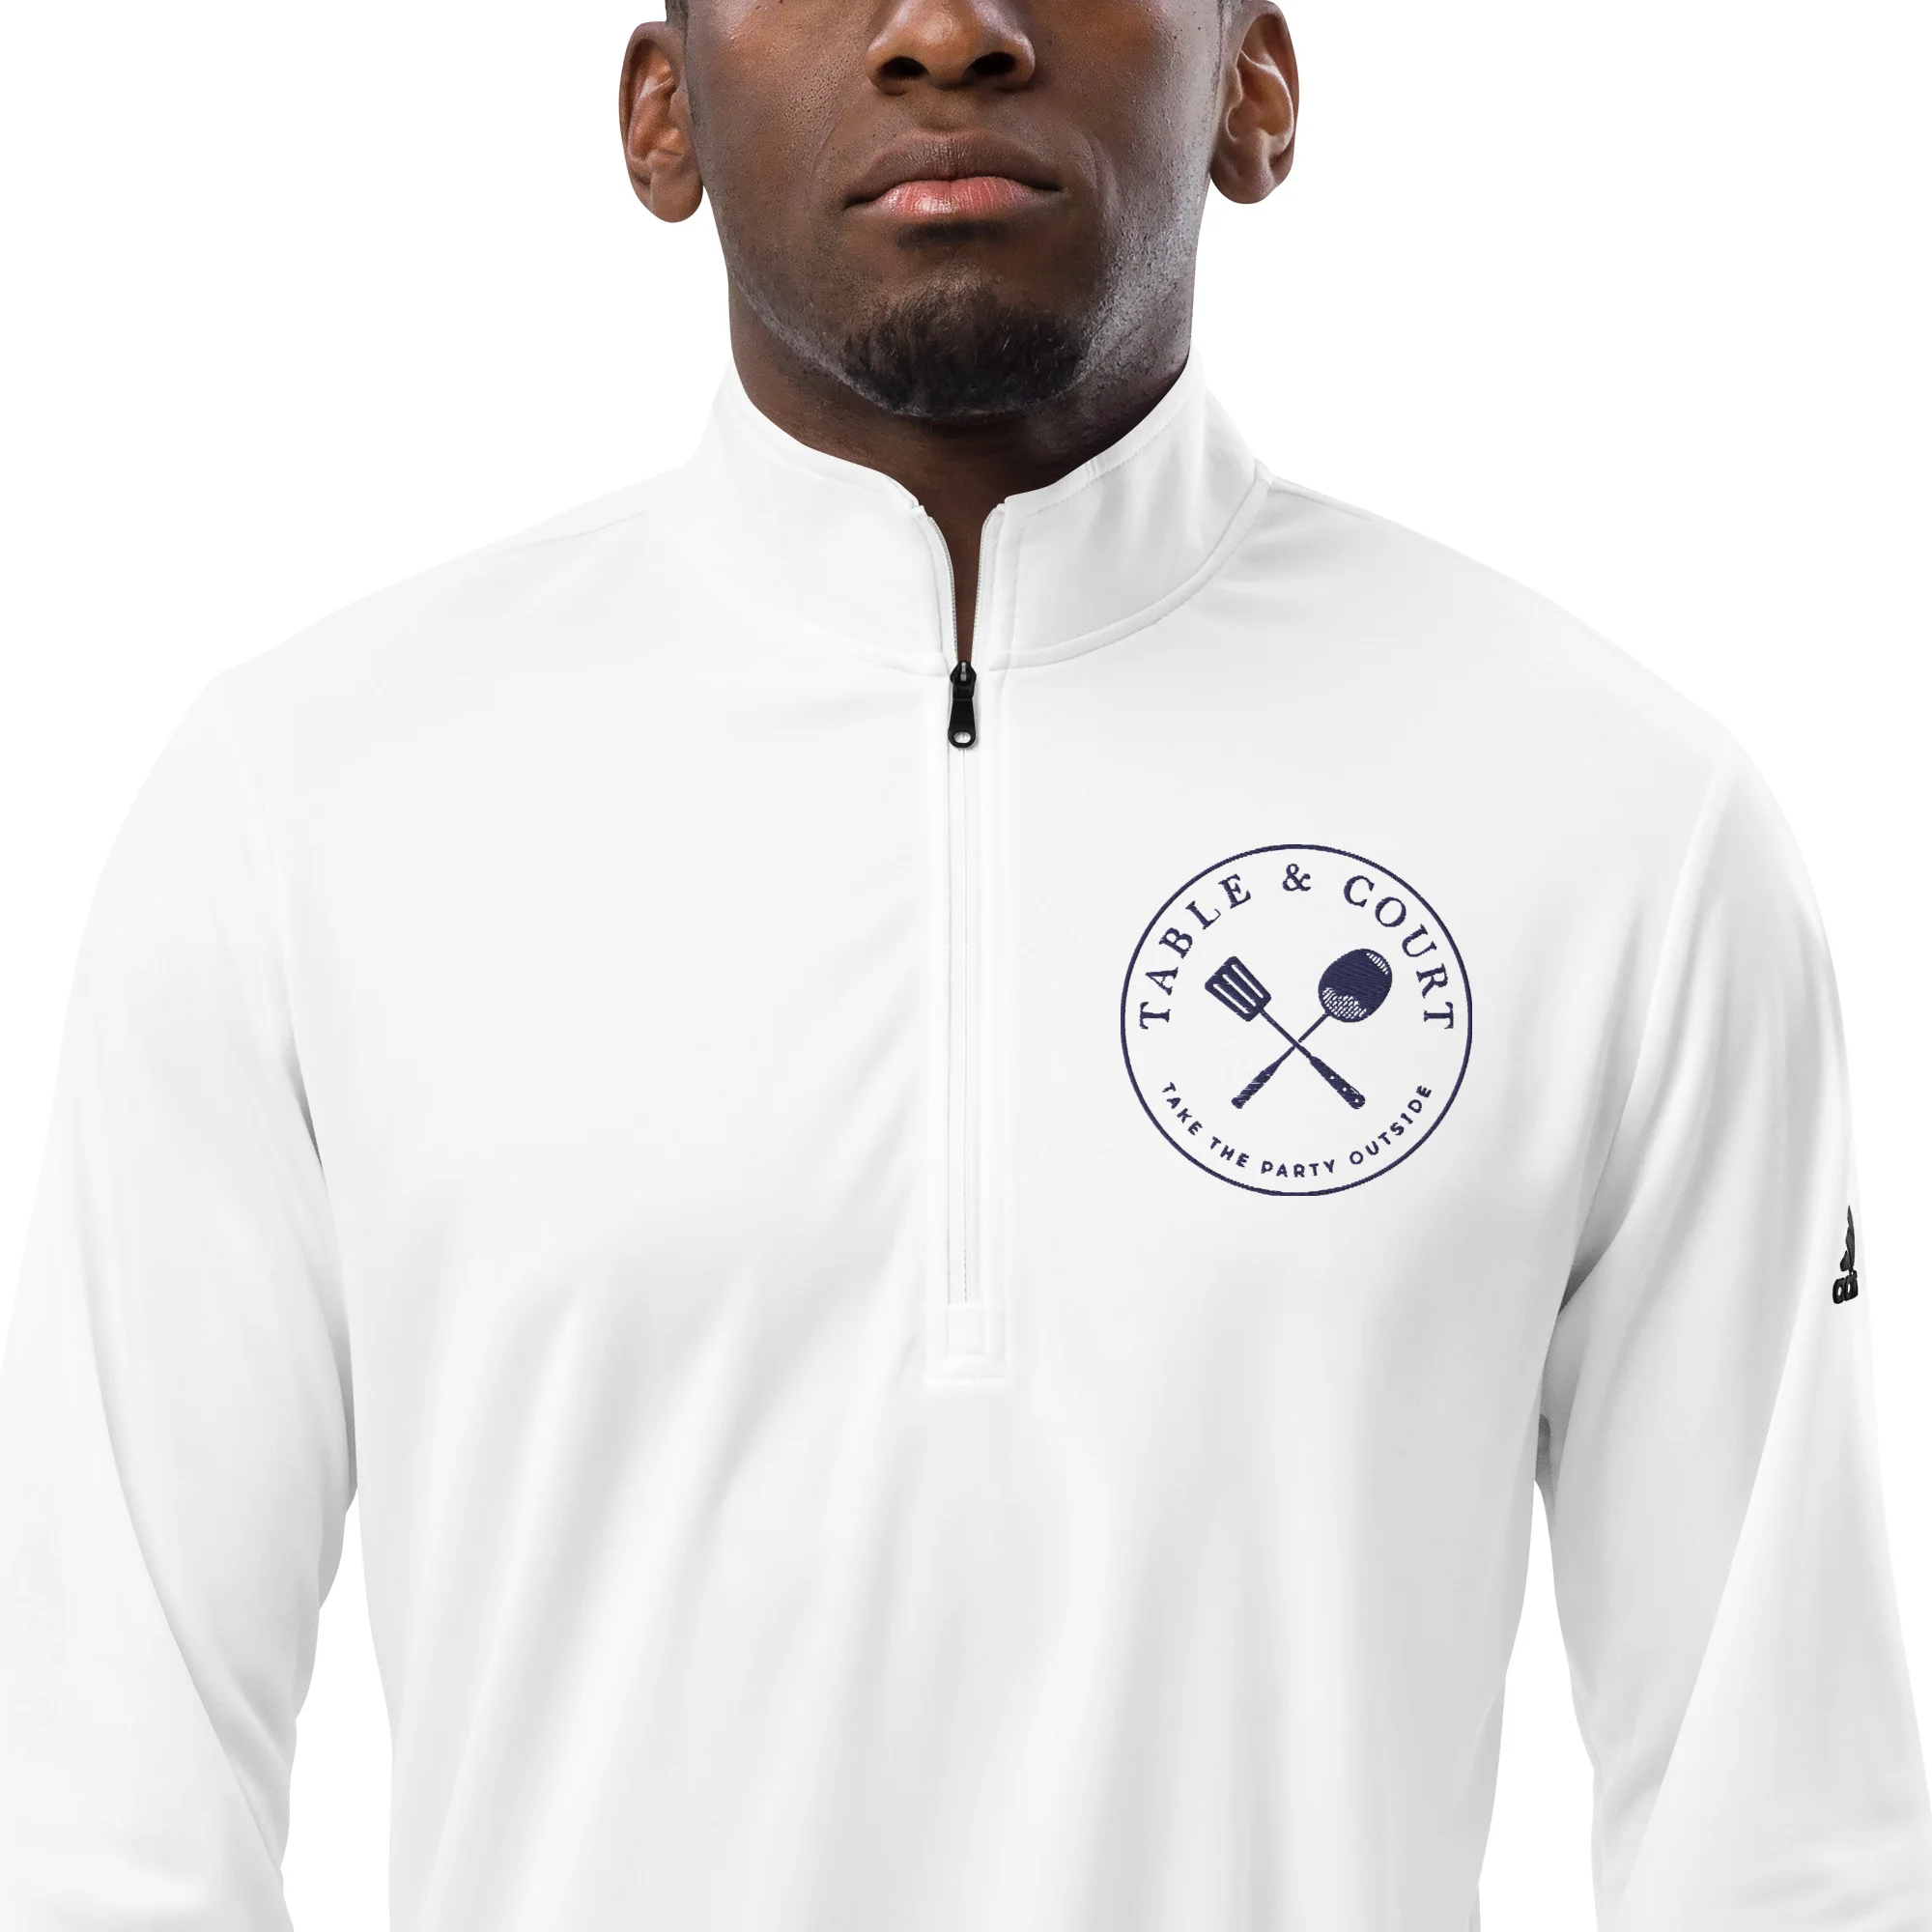 Mens Adidas Quarter Zip Pullover by Table and Court - Navy Logo - White